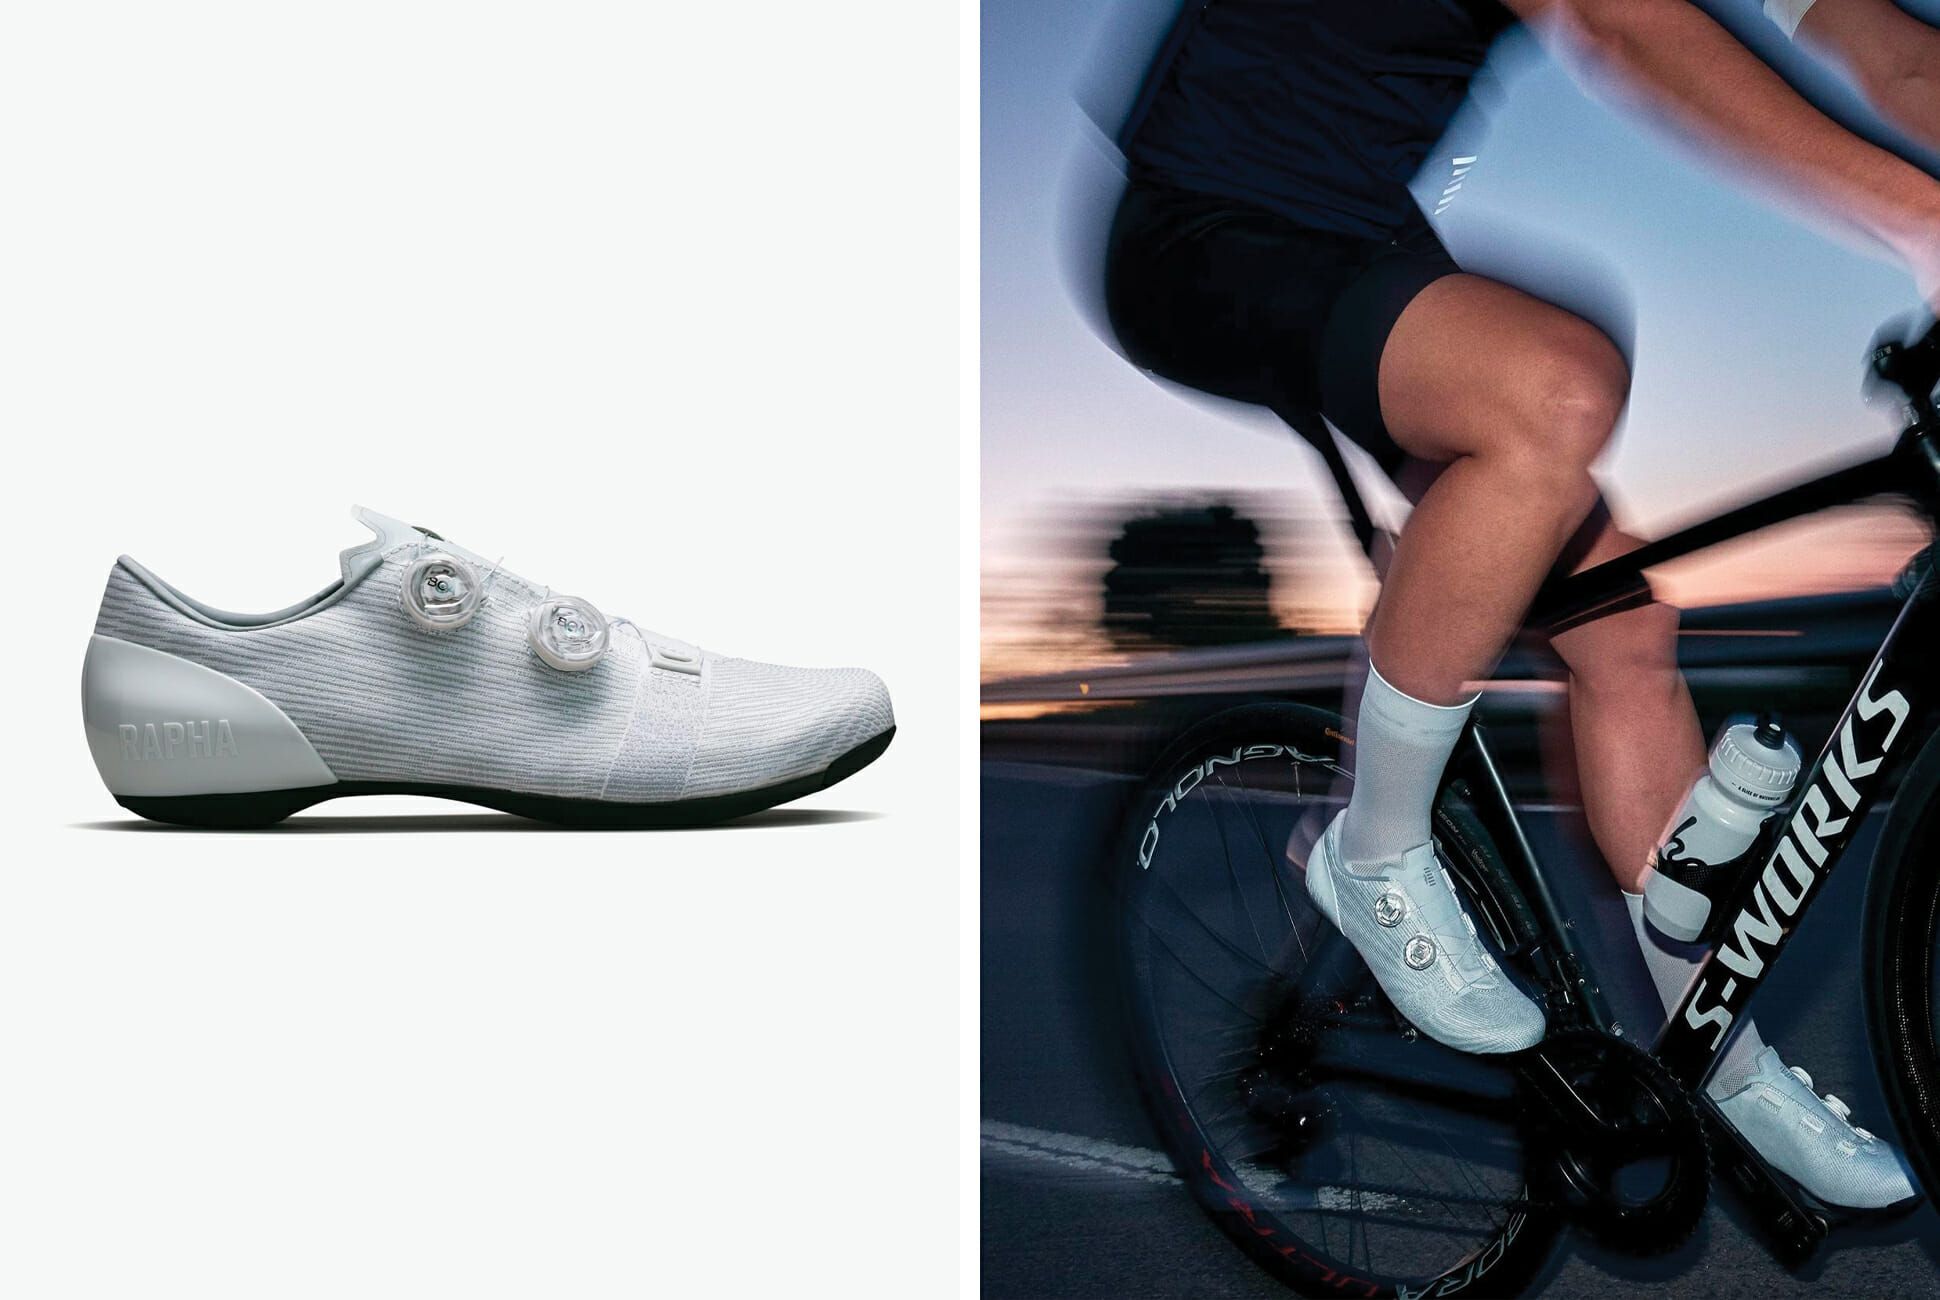 sneakers for bike riding